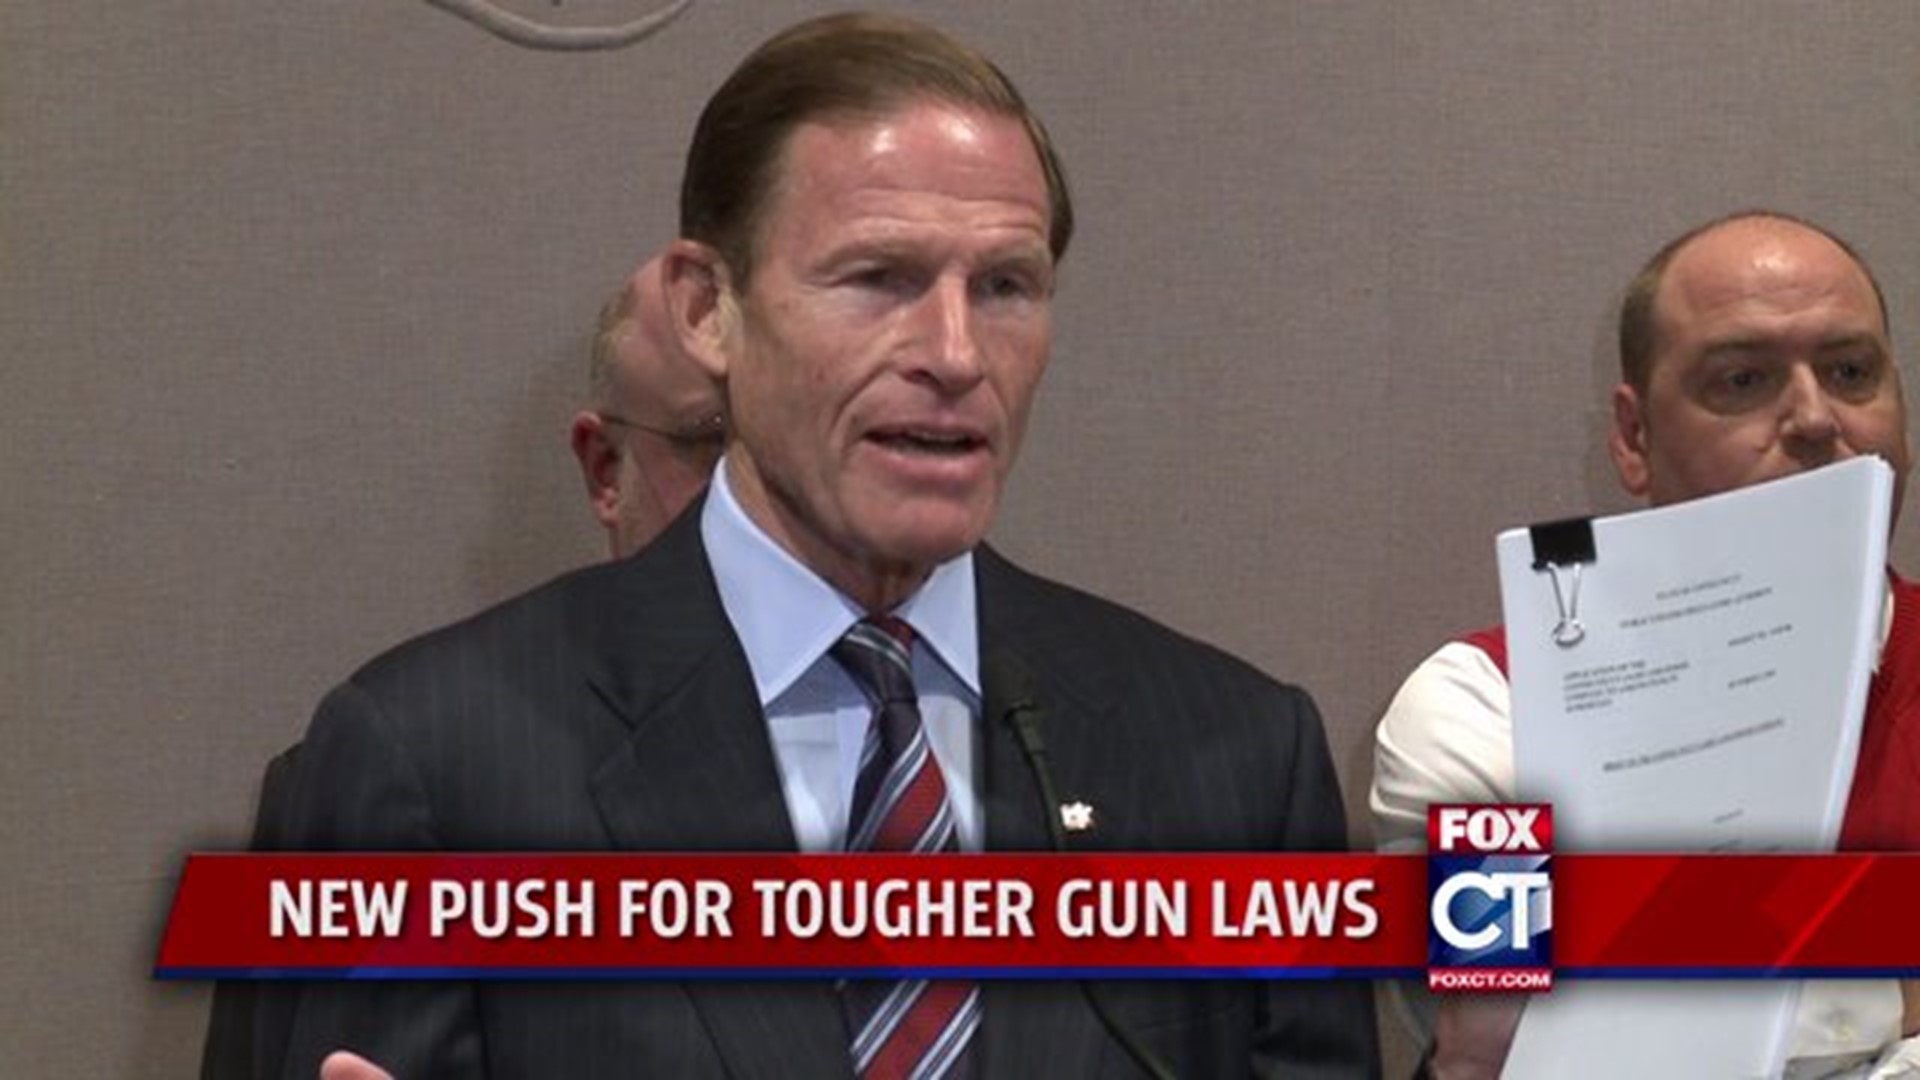 Today In CT: New Push For Tougher Gun Laws